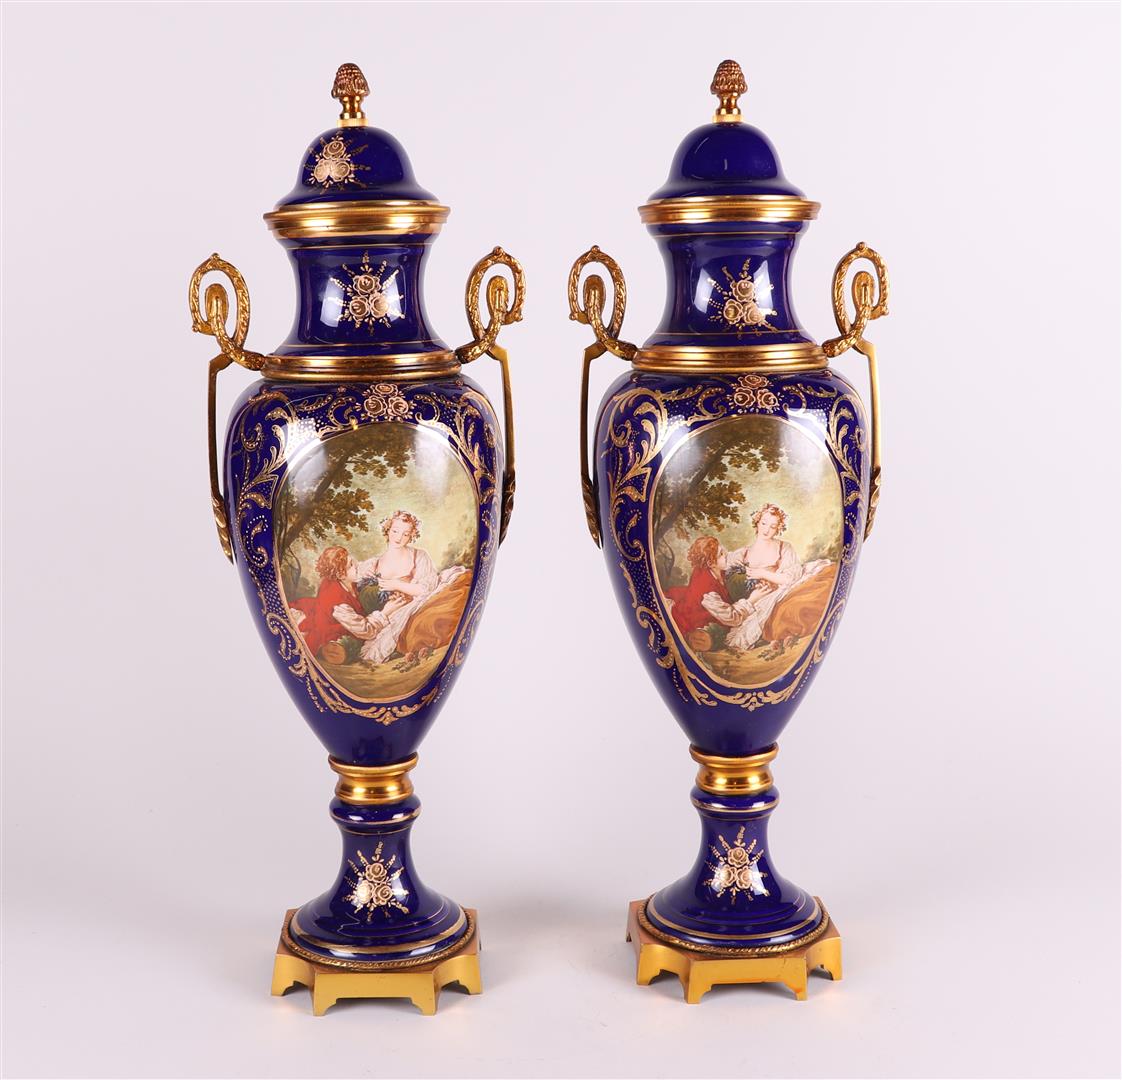 A set of two Sèvres-style porcelain vases with brass mounts. France, 20th century.